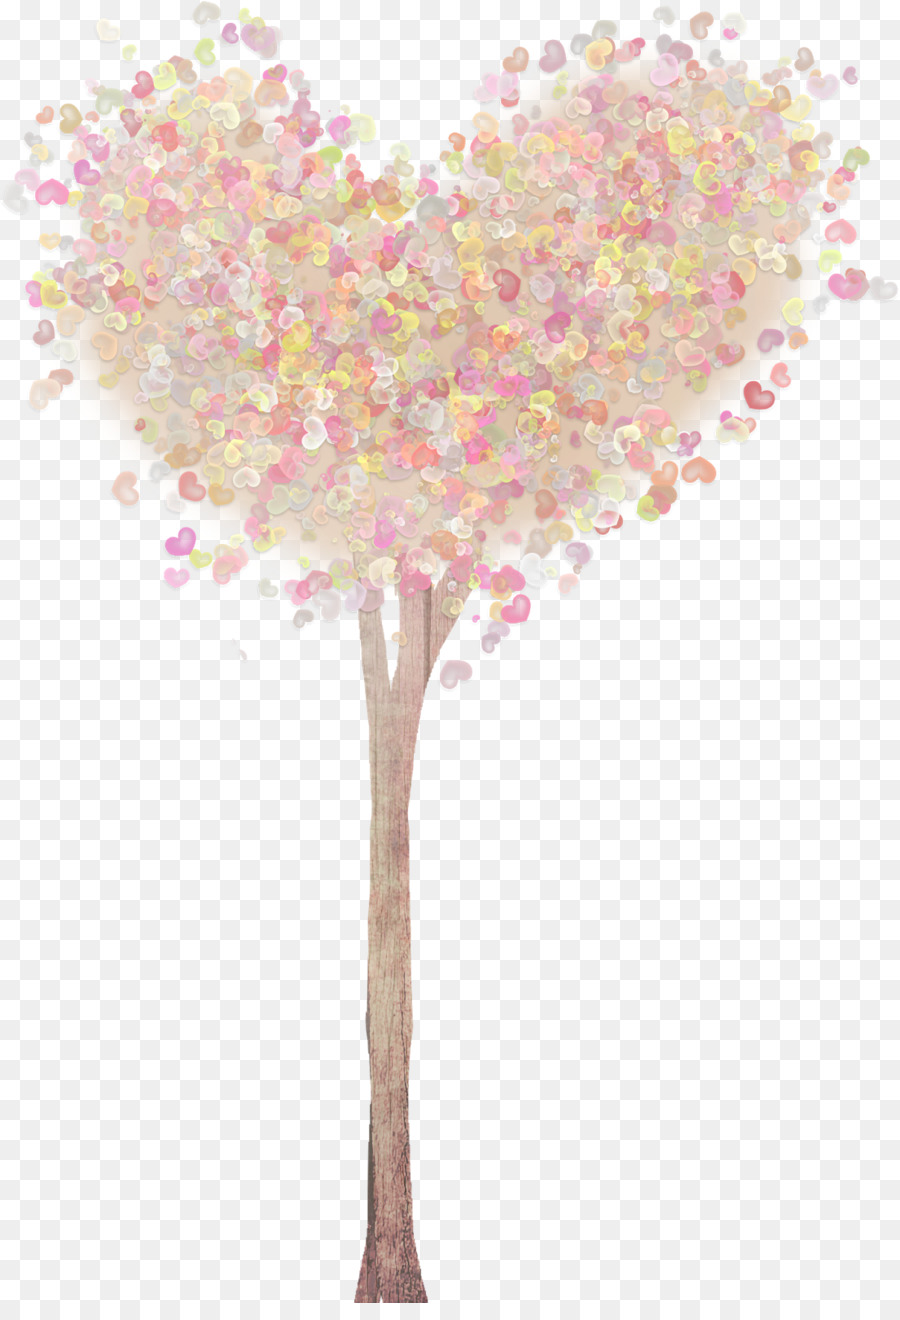 Tree Heart Drawing Paper Printing - tree png download - 1105*1600 - Free Transparent Tree png Download.